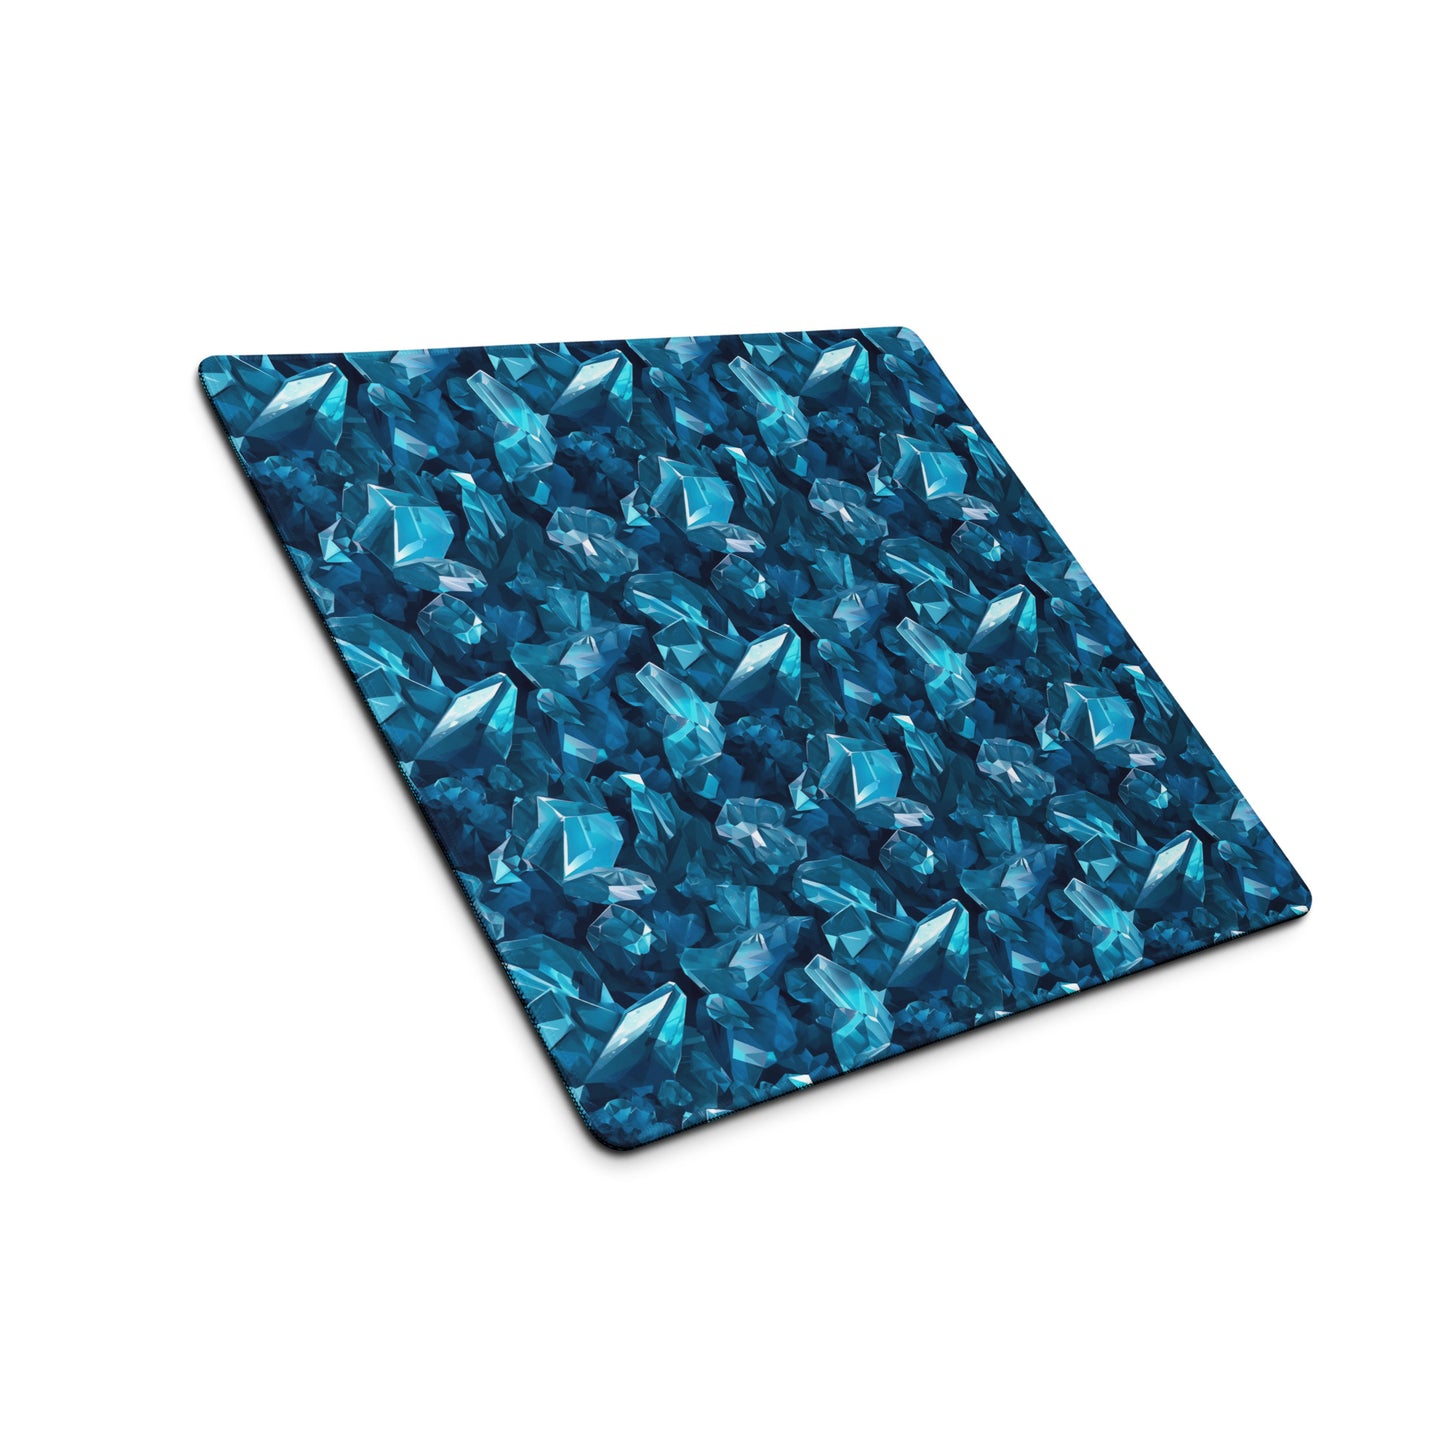 An 18" x 16" gaming desk pad with blue crystals sitting at an angle.